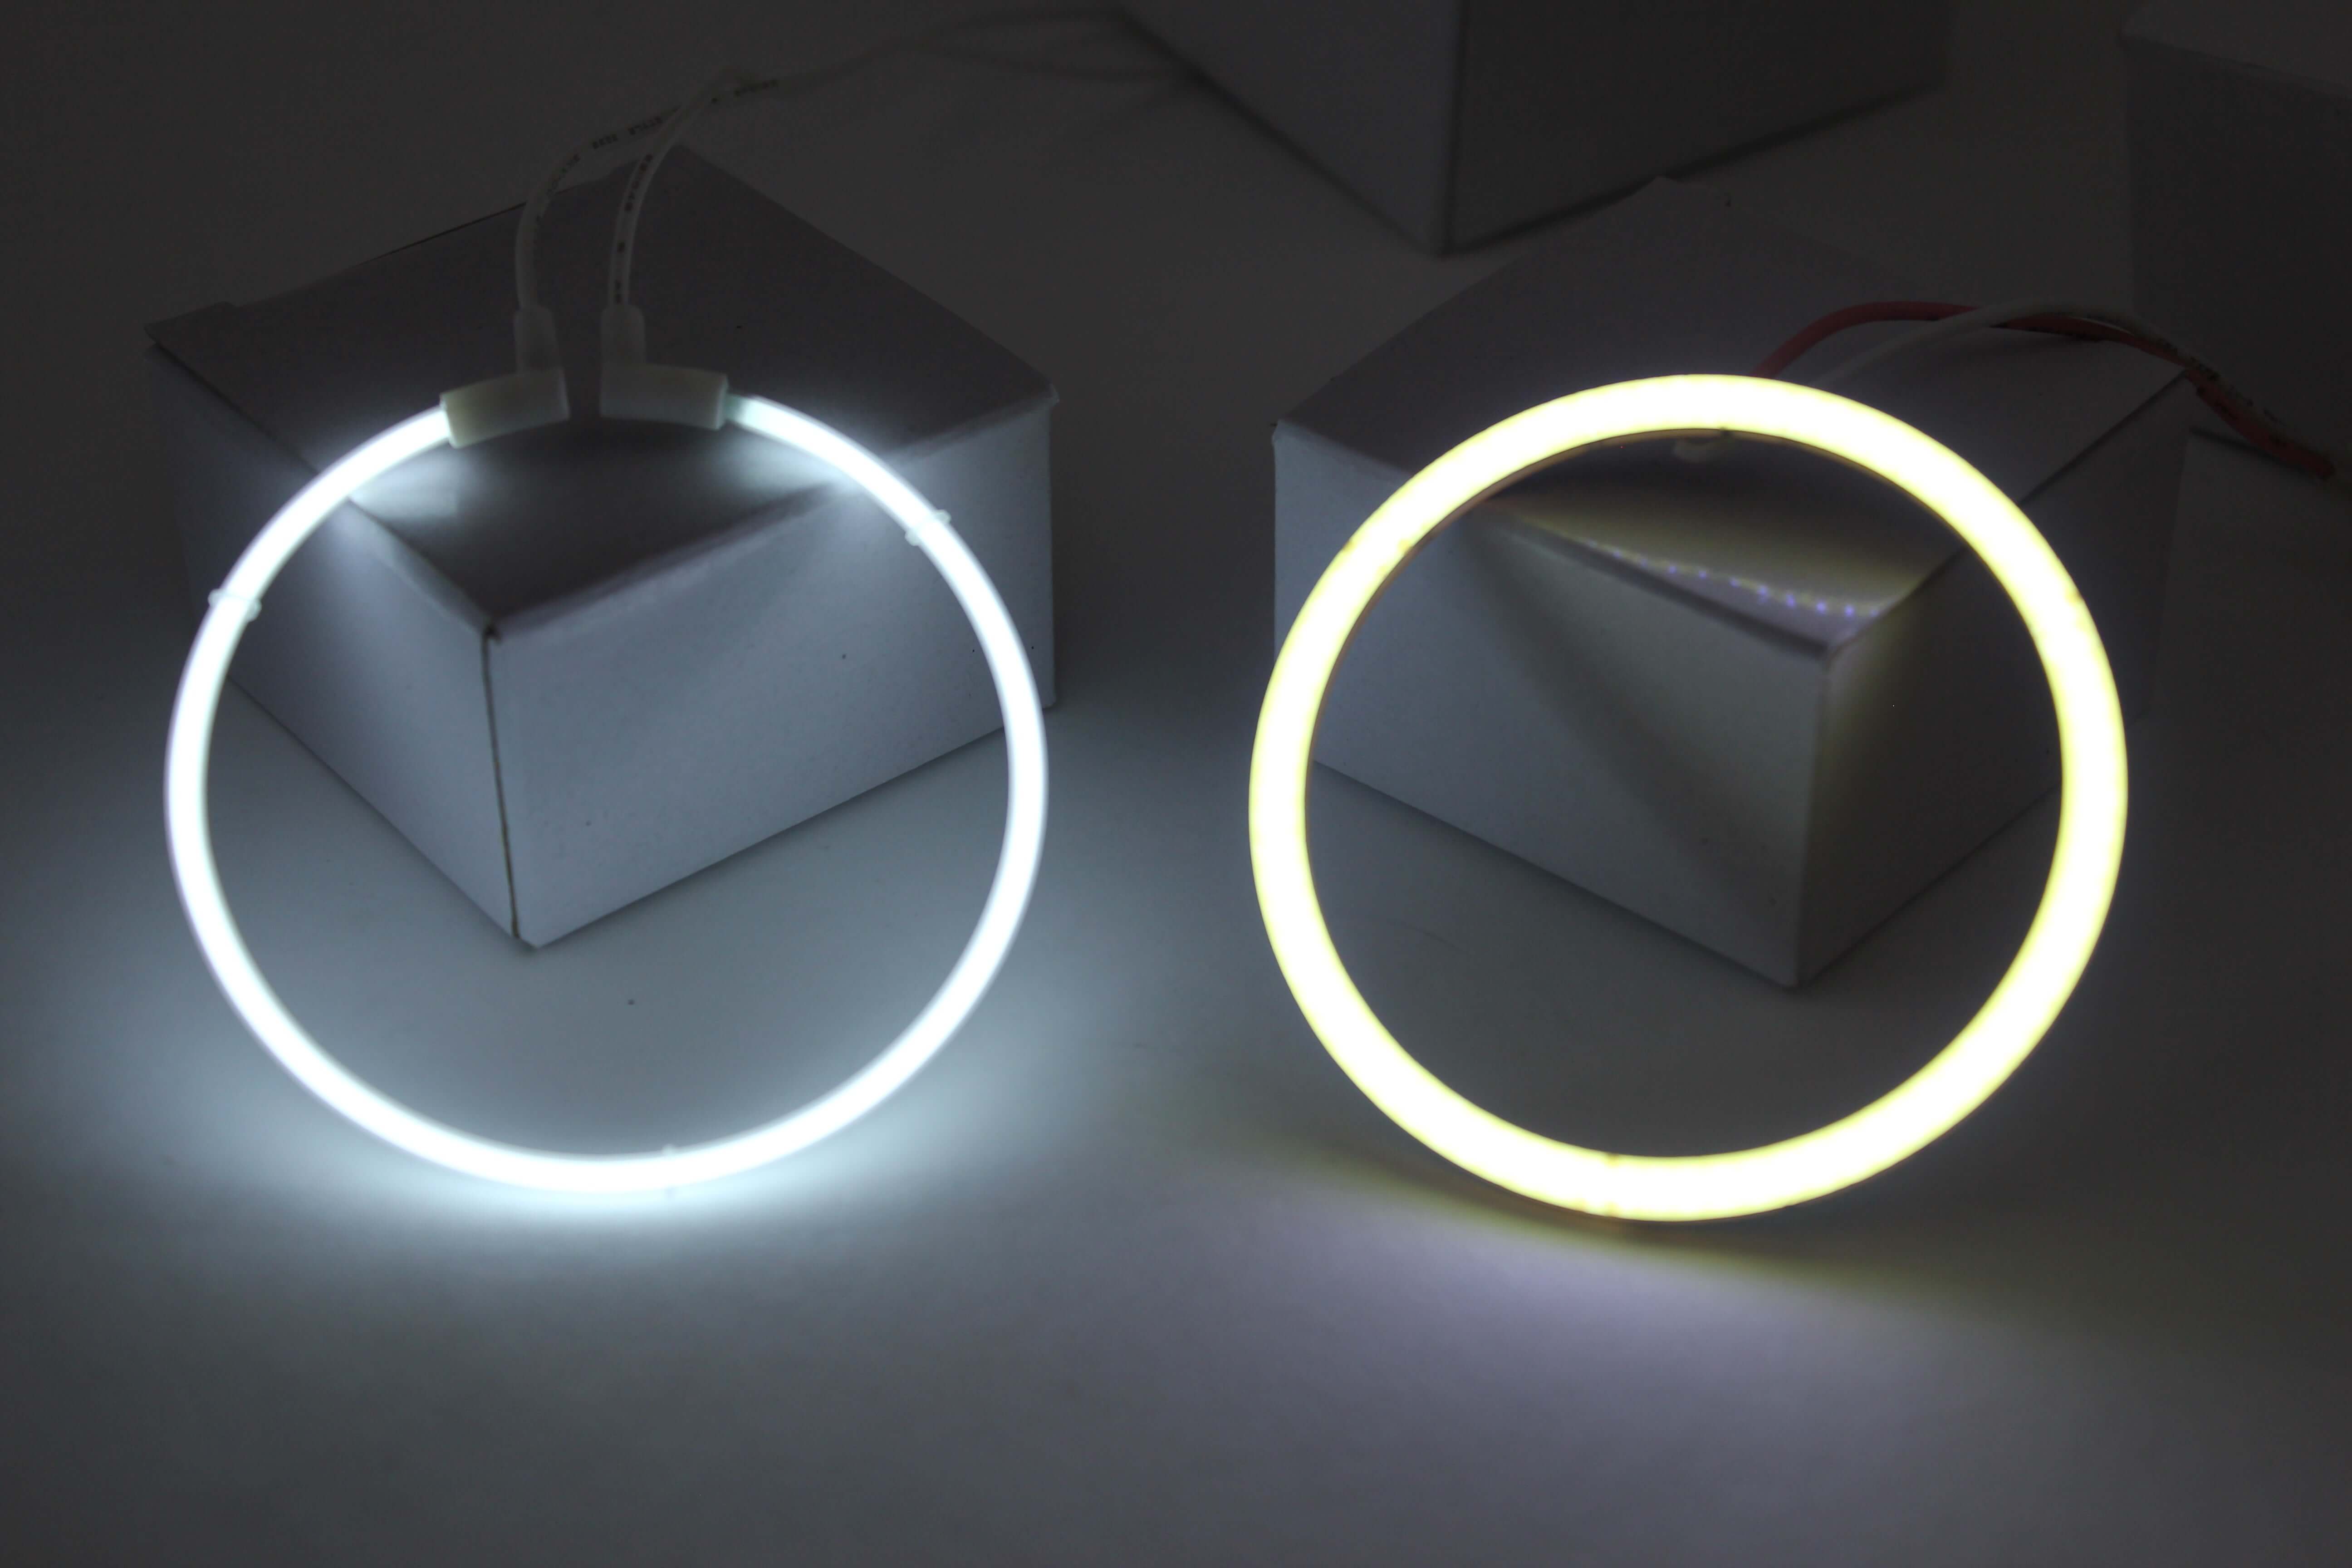 Comparing our Led and CCFL angel eye rings